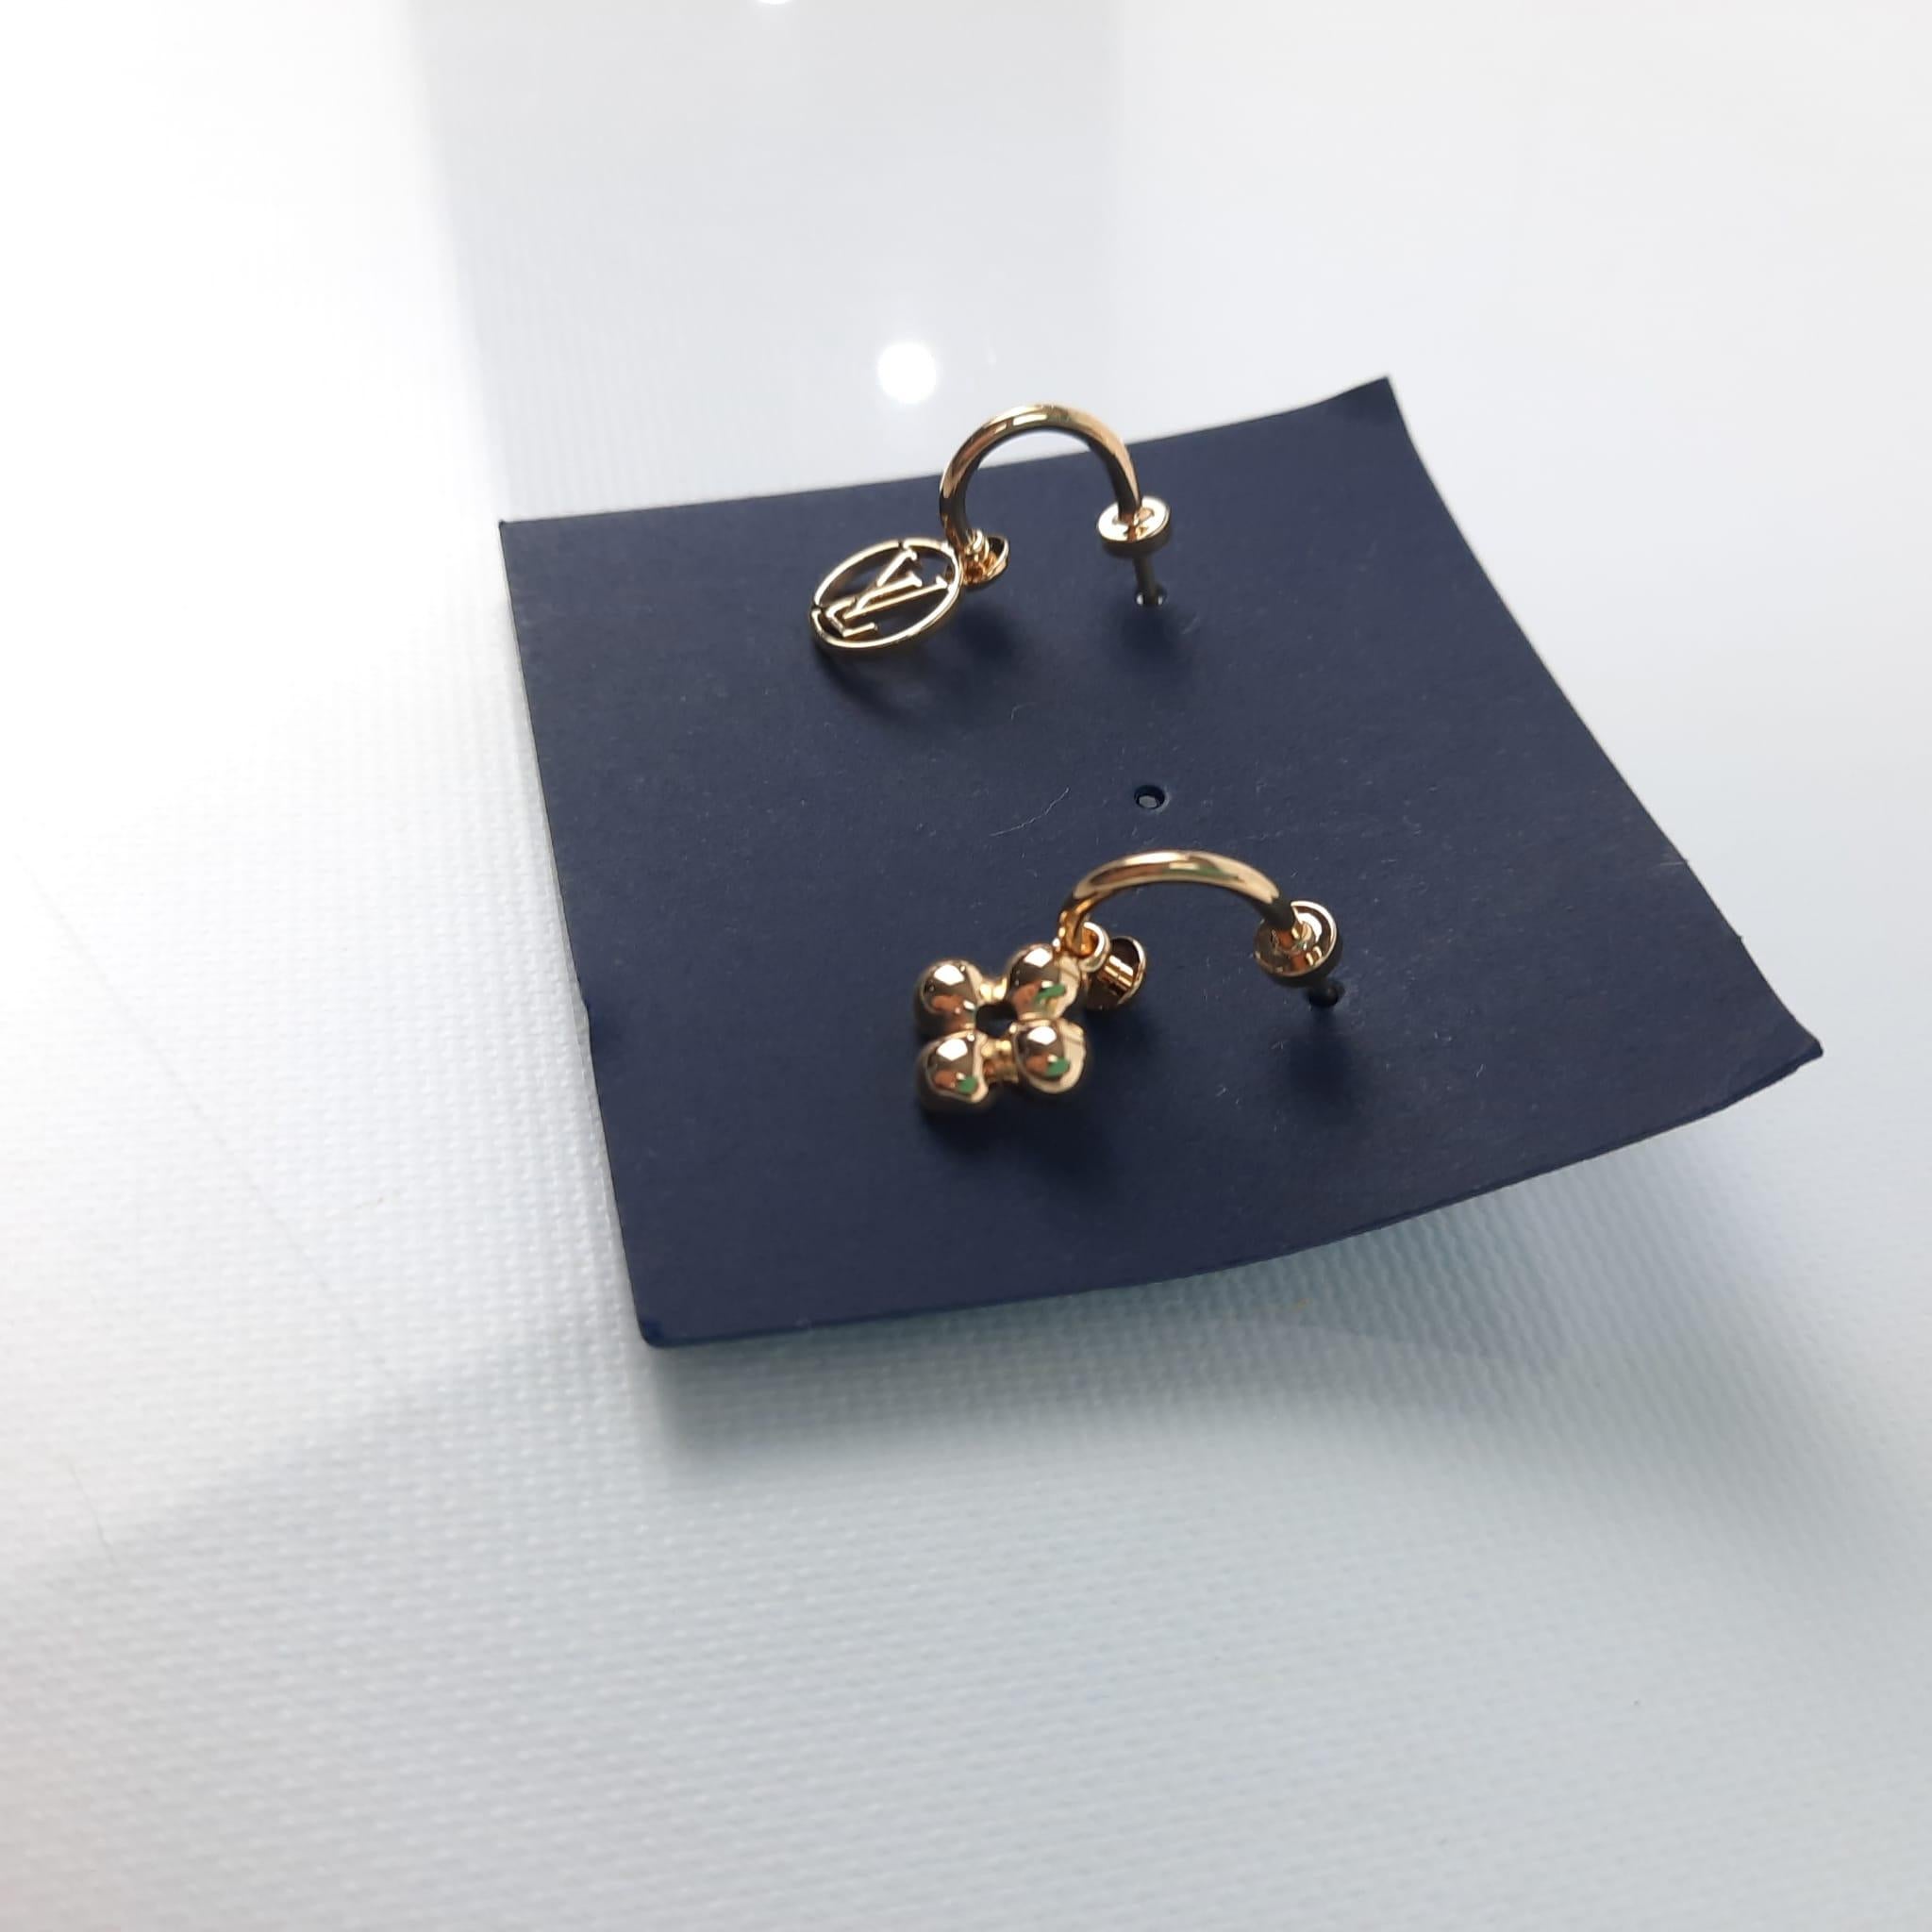 Blooming reinterprets the House's iconic LV Circle and Monogram Flower signatures as dangling charms. A perfect gift, these feminine earrings will provide the finishing touch for any look.
Length: ~2.5 cm/1 inch
Metal with gold-colour